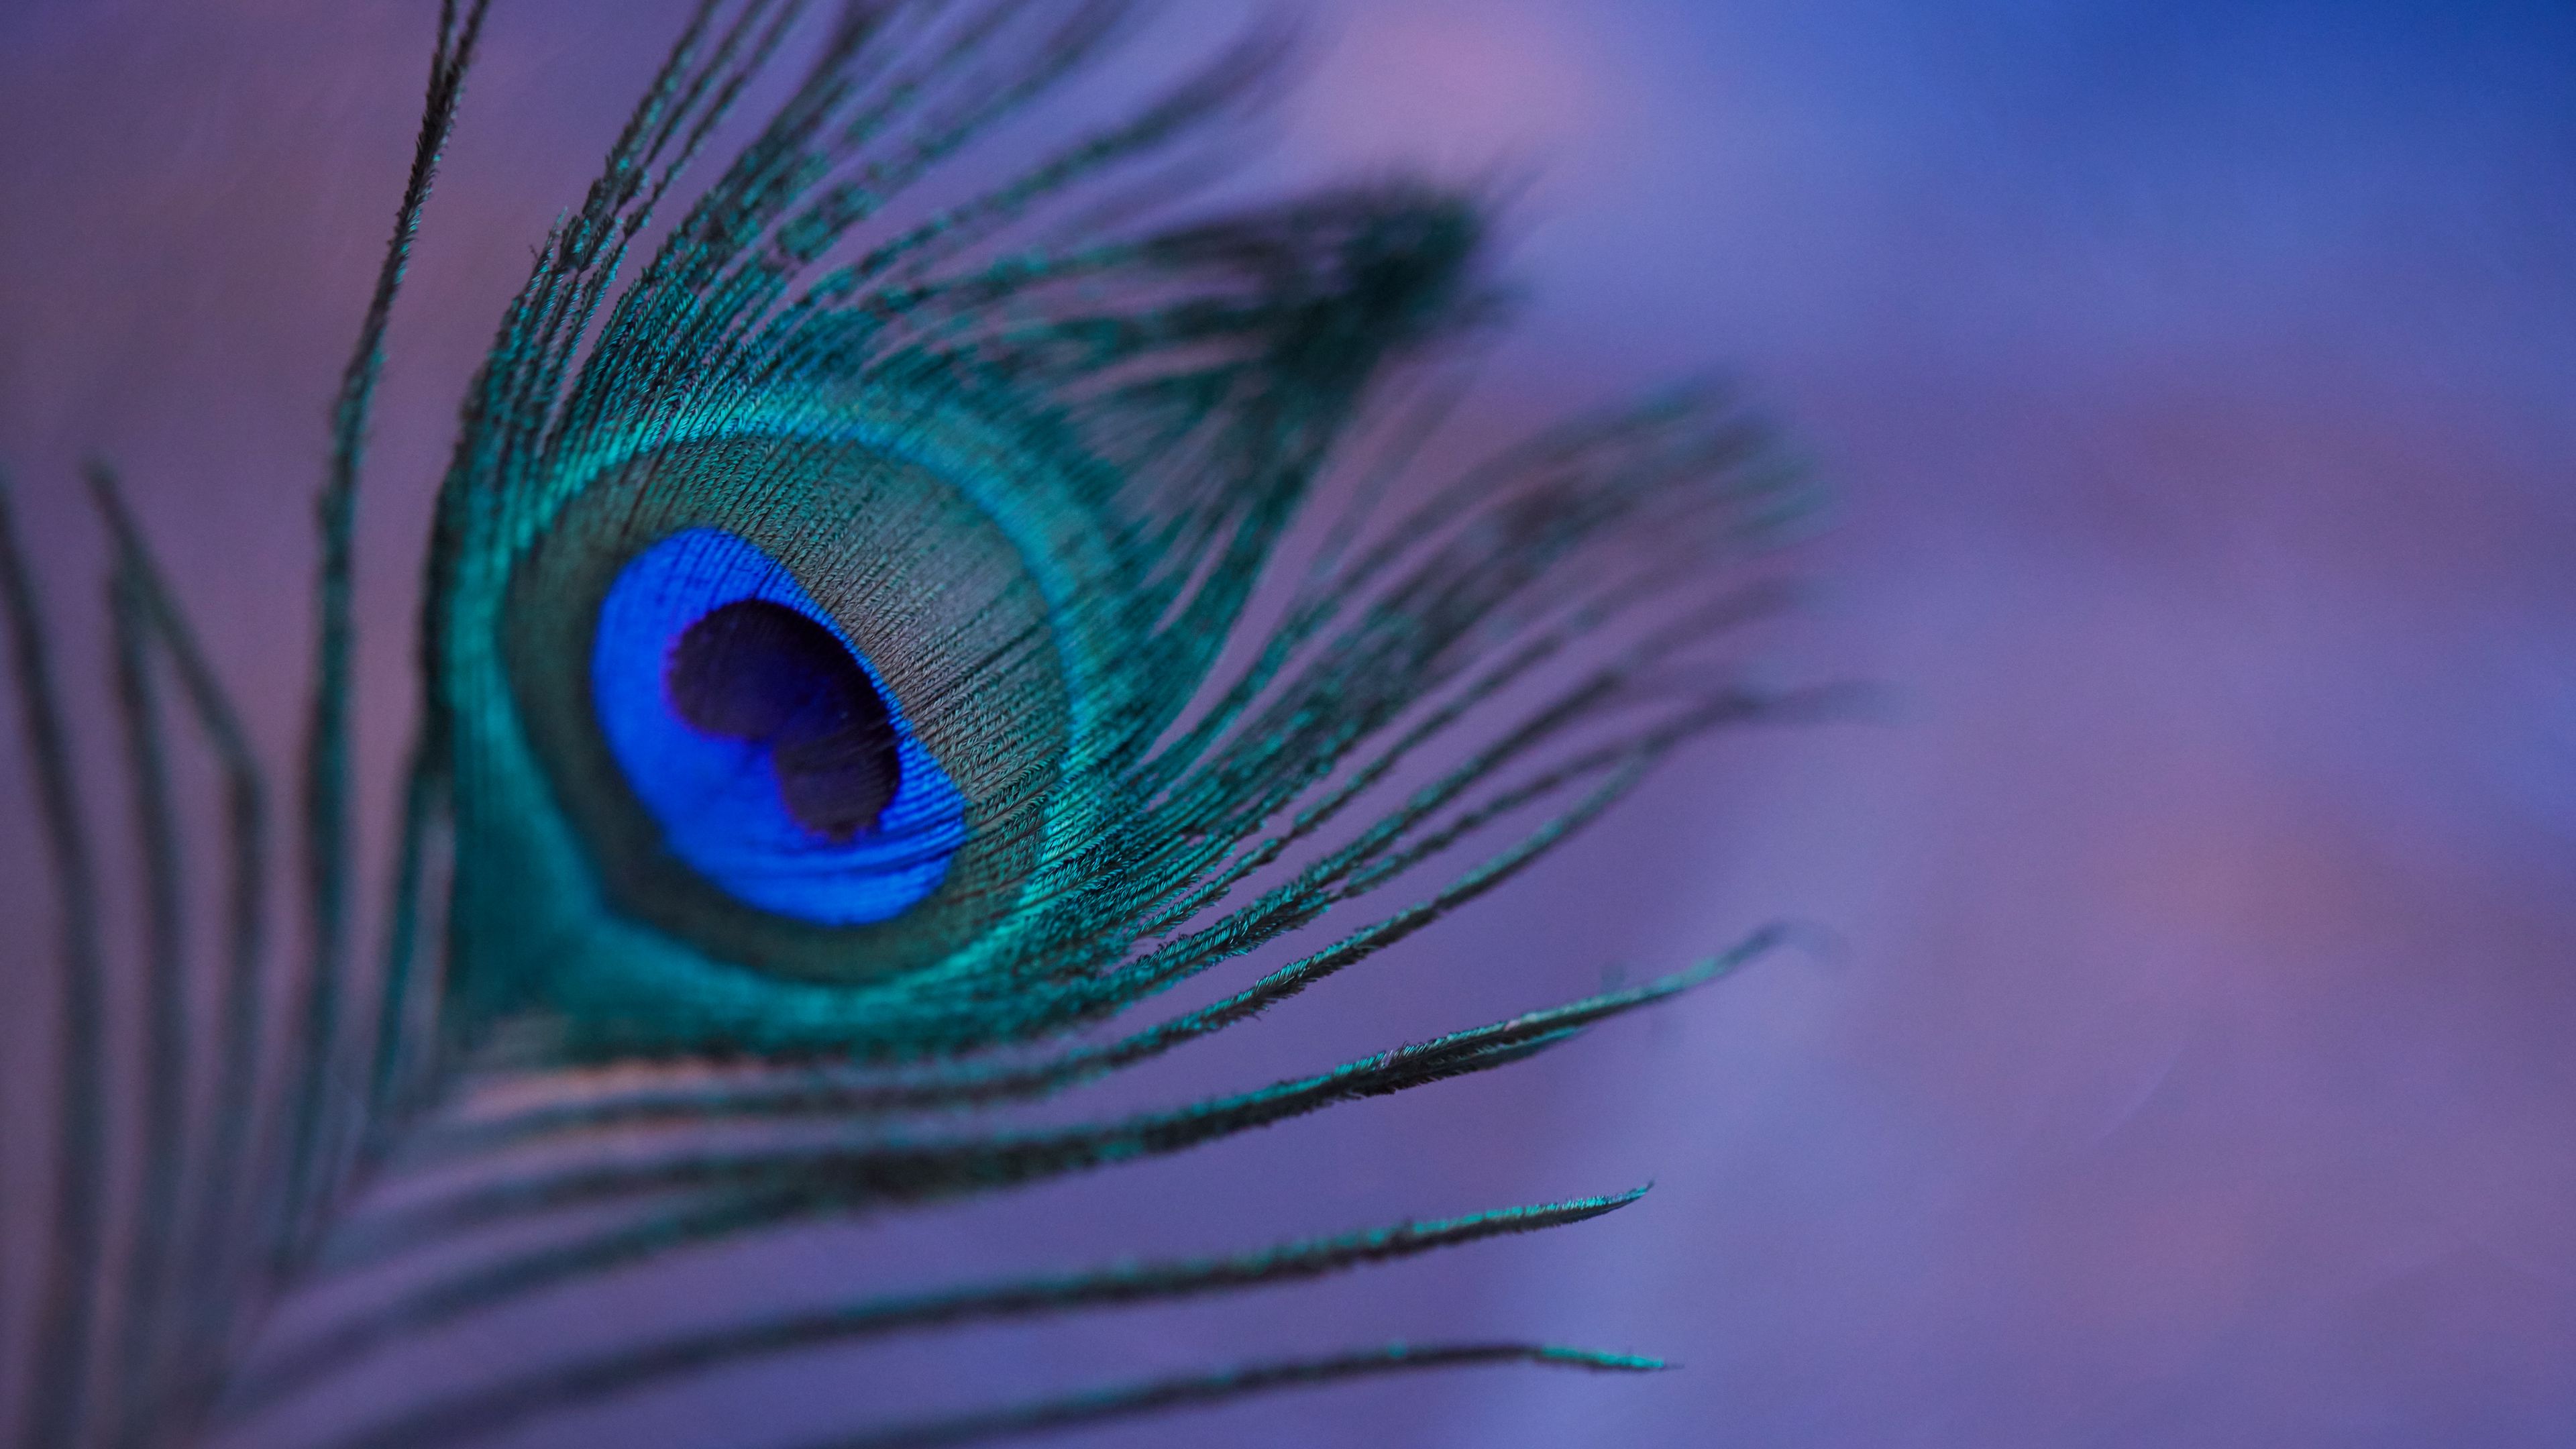 Download wallpaper 3840x2160 peacock feather, feather, colorful, macro 4k  uhd 16:9 hd background